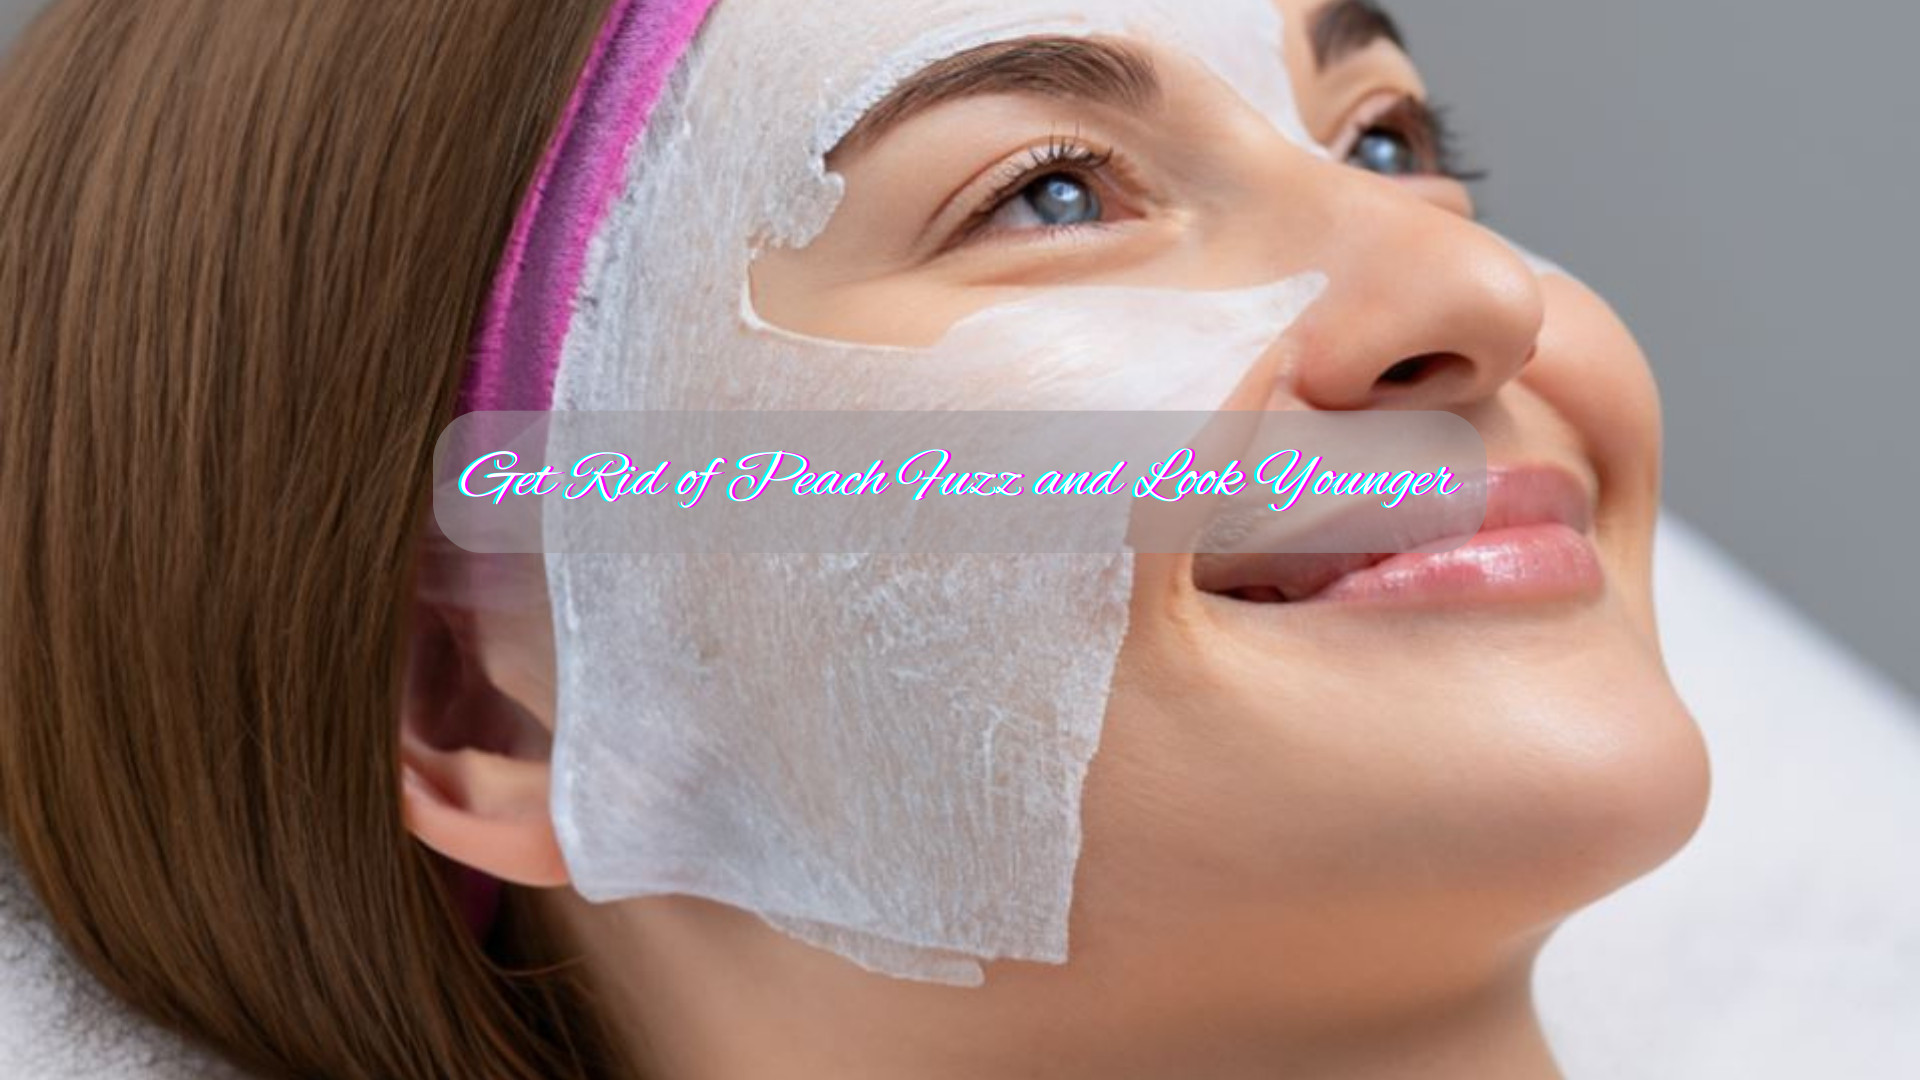 Dermaplaning Near Me: Find Dermaplaning Places in Your Area